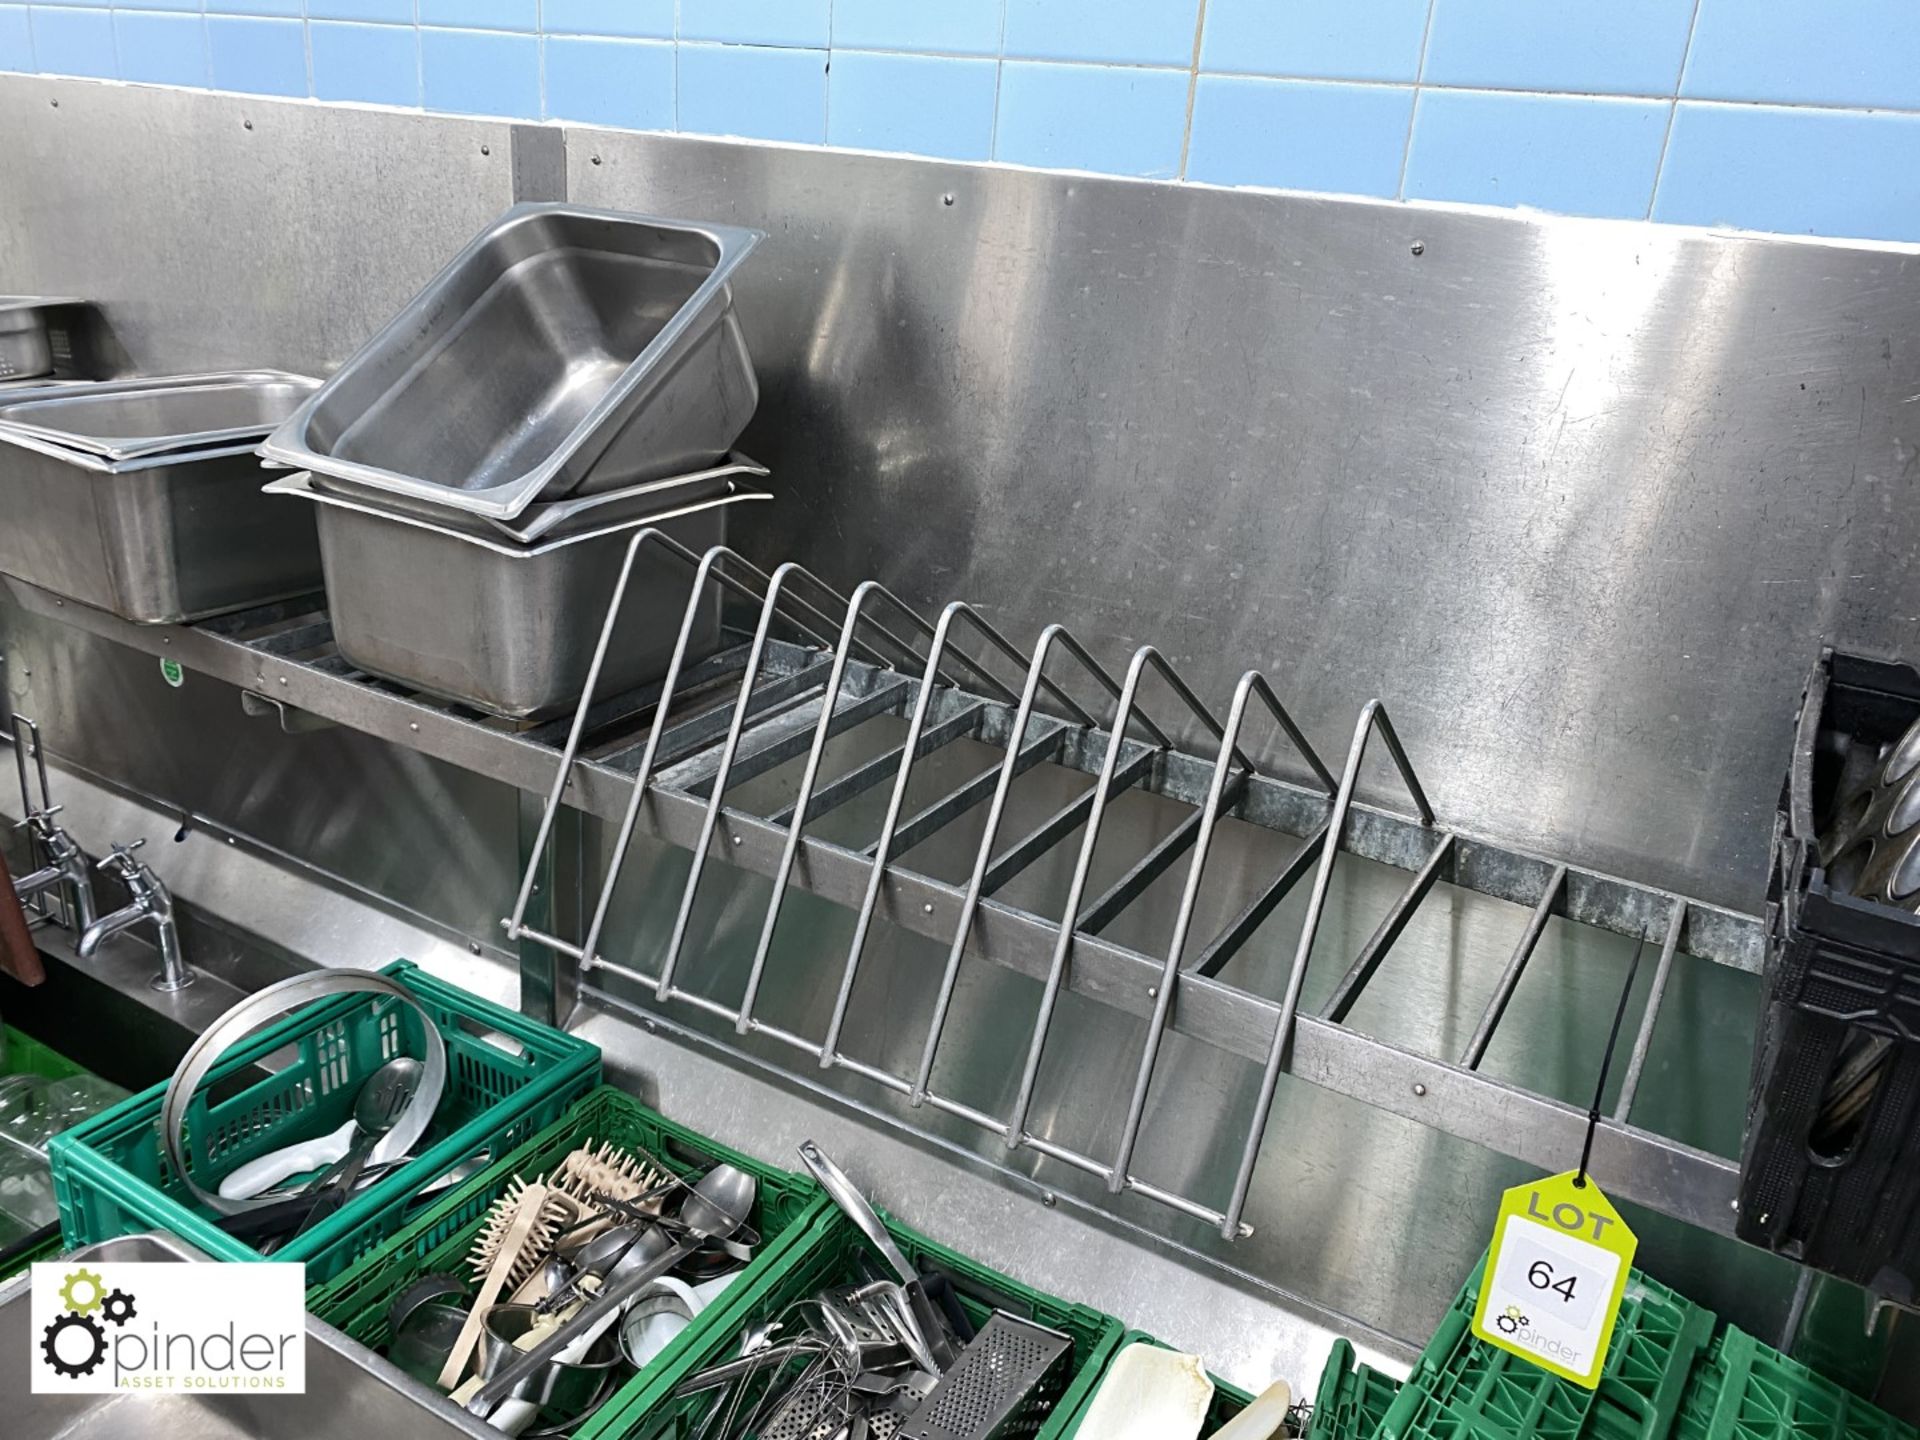 Steel wall mounted Draining Shelf, 2450mm x 300mm (located in Pot Wash Room) - Image 2 of 2